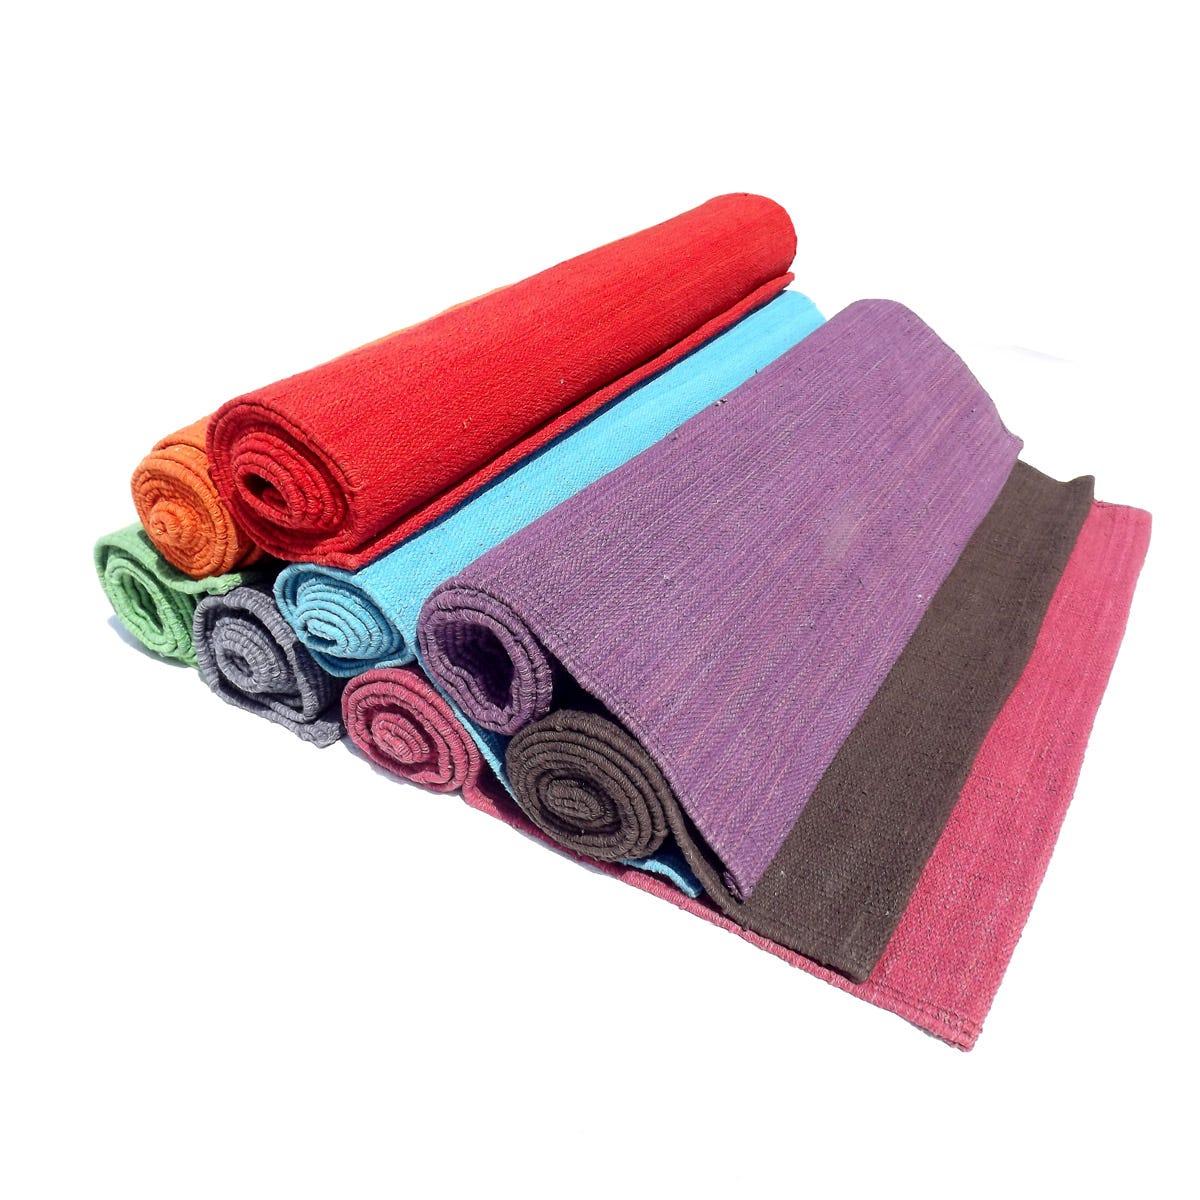 Know 5 essential benefits of using Cotton Yoga Mat